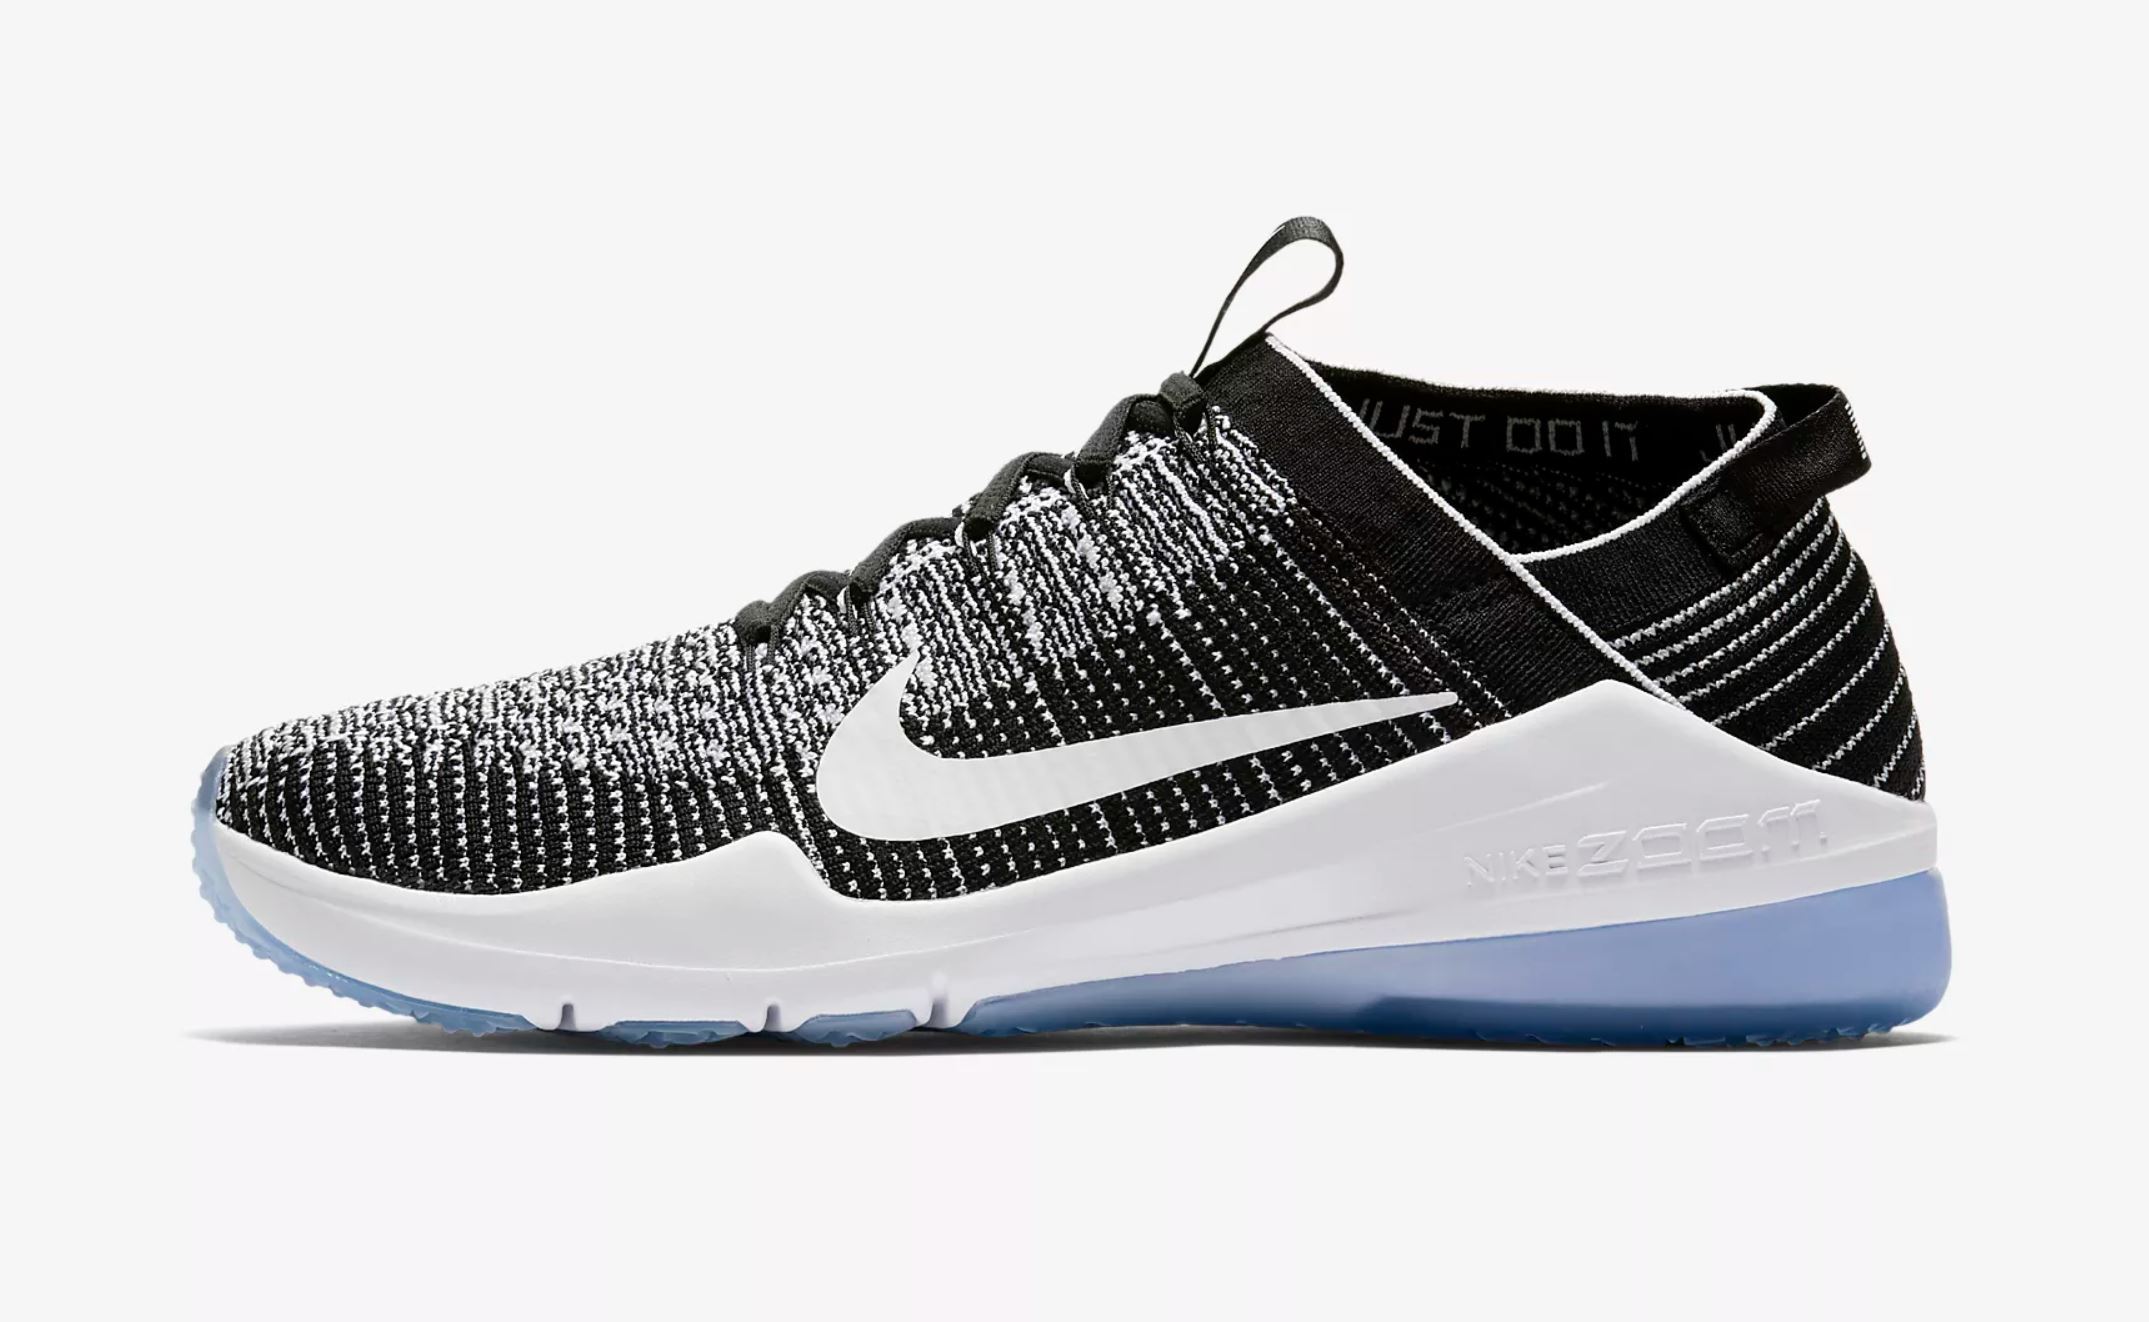 Nike Has Just Dropped a New Trainer Women, the Air Zoom Flyknit 2 - WearTesters